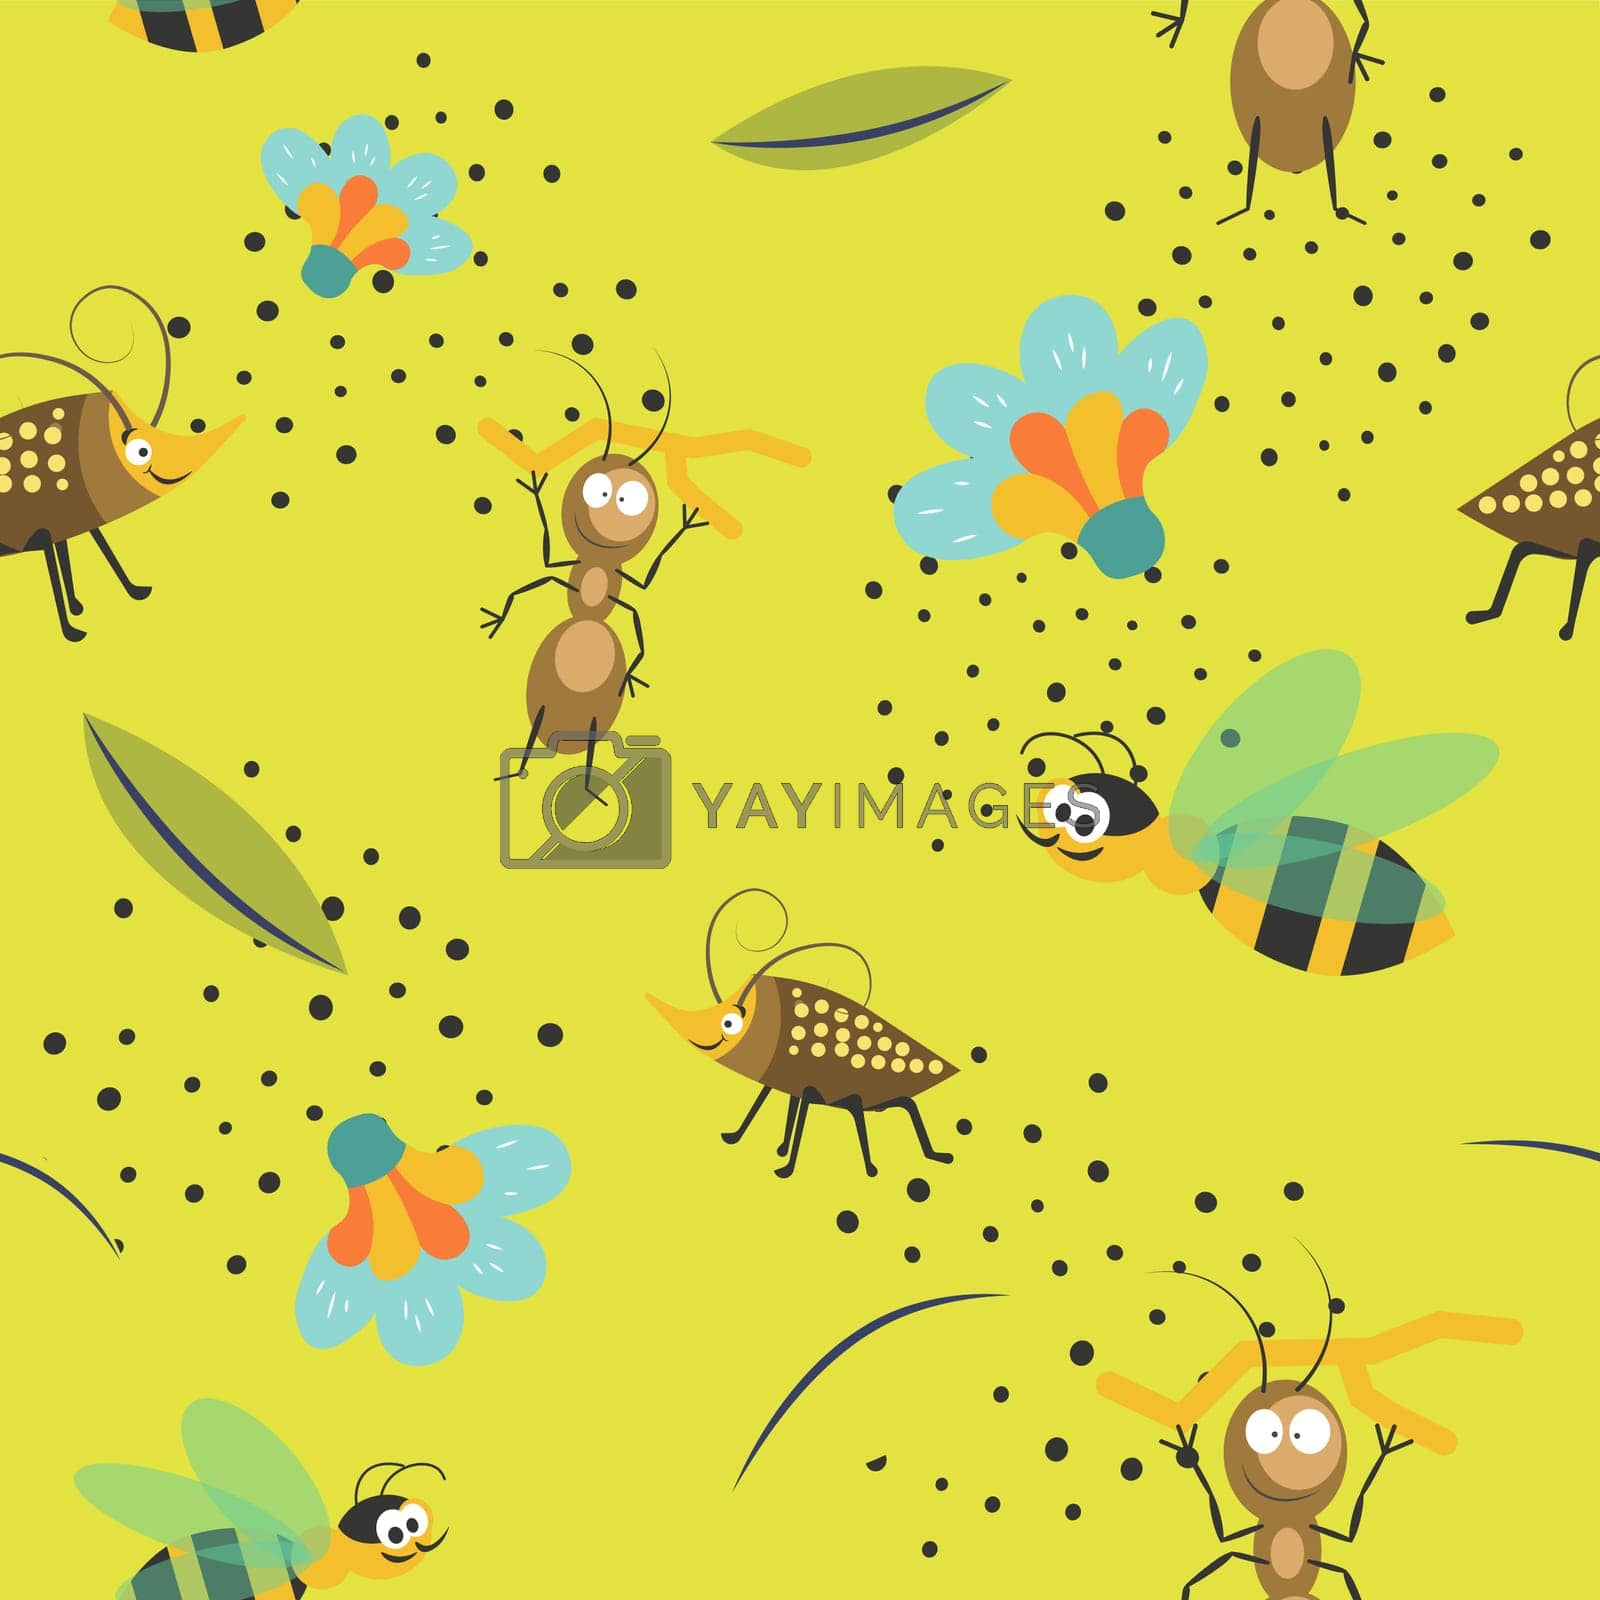 Royalty free image of Funny insects, ants and beetles, bees pattern by Sonulkaster